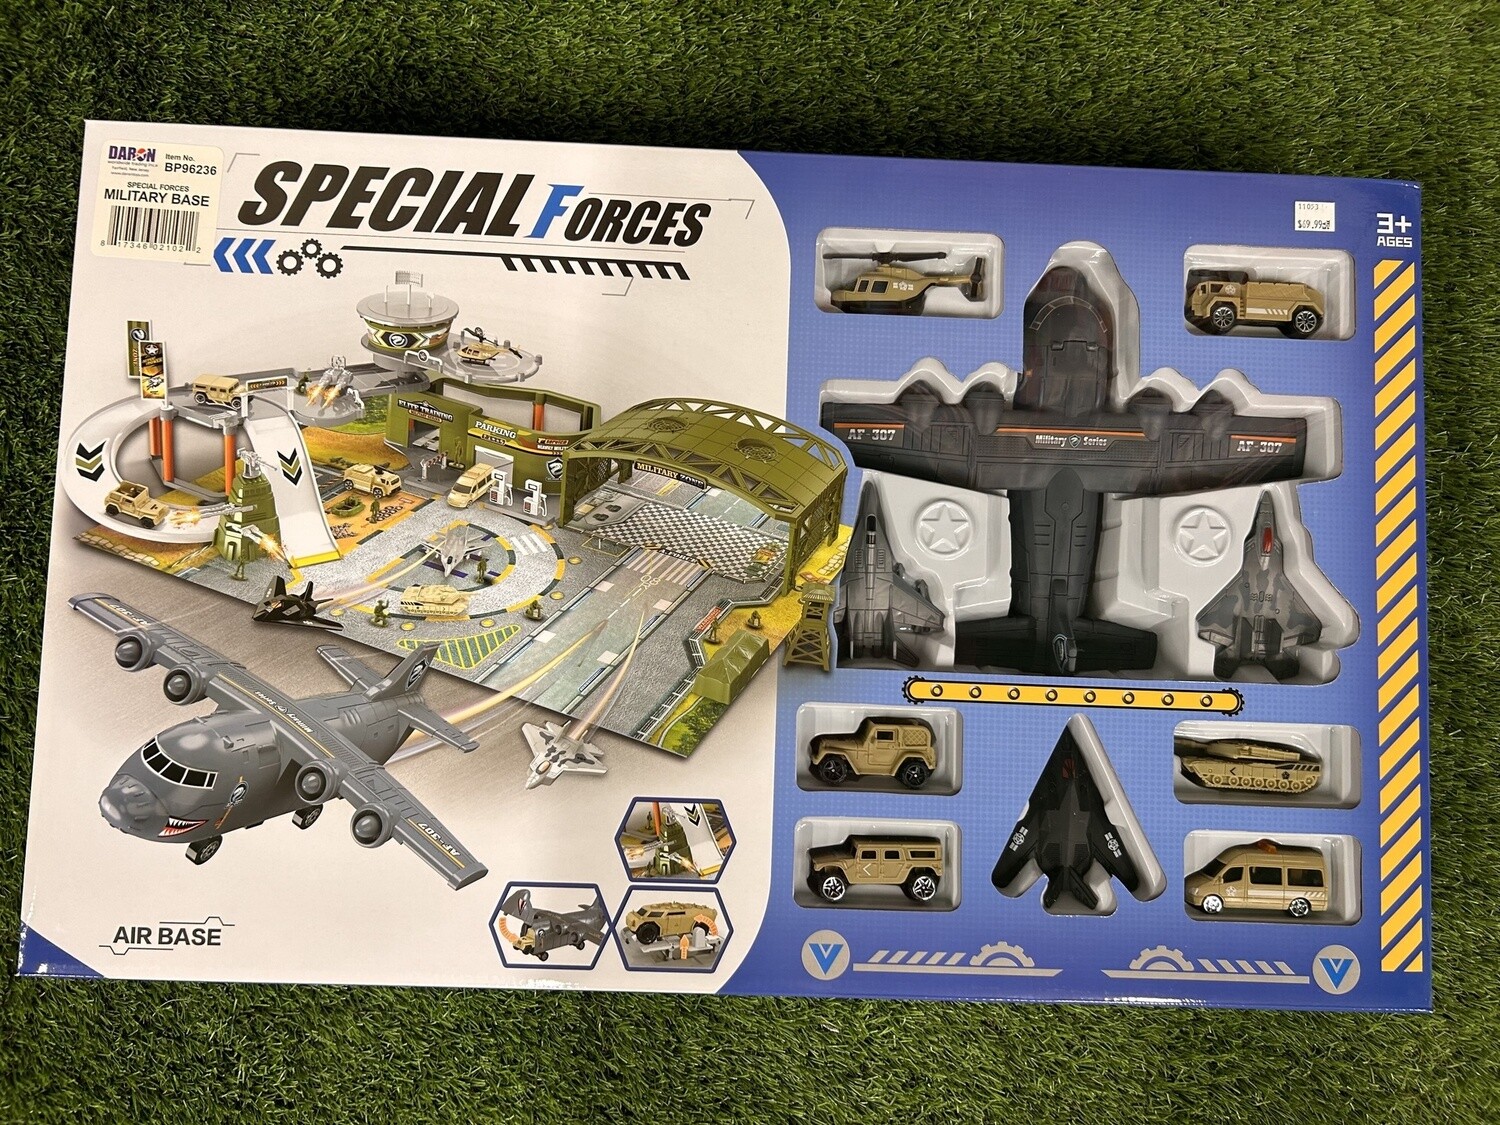 The Military Playset